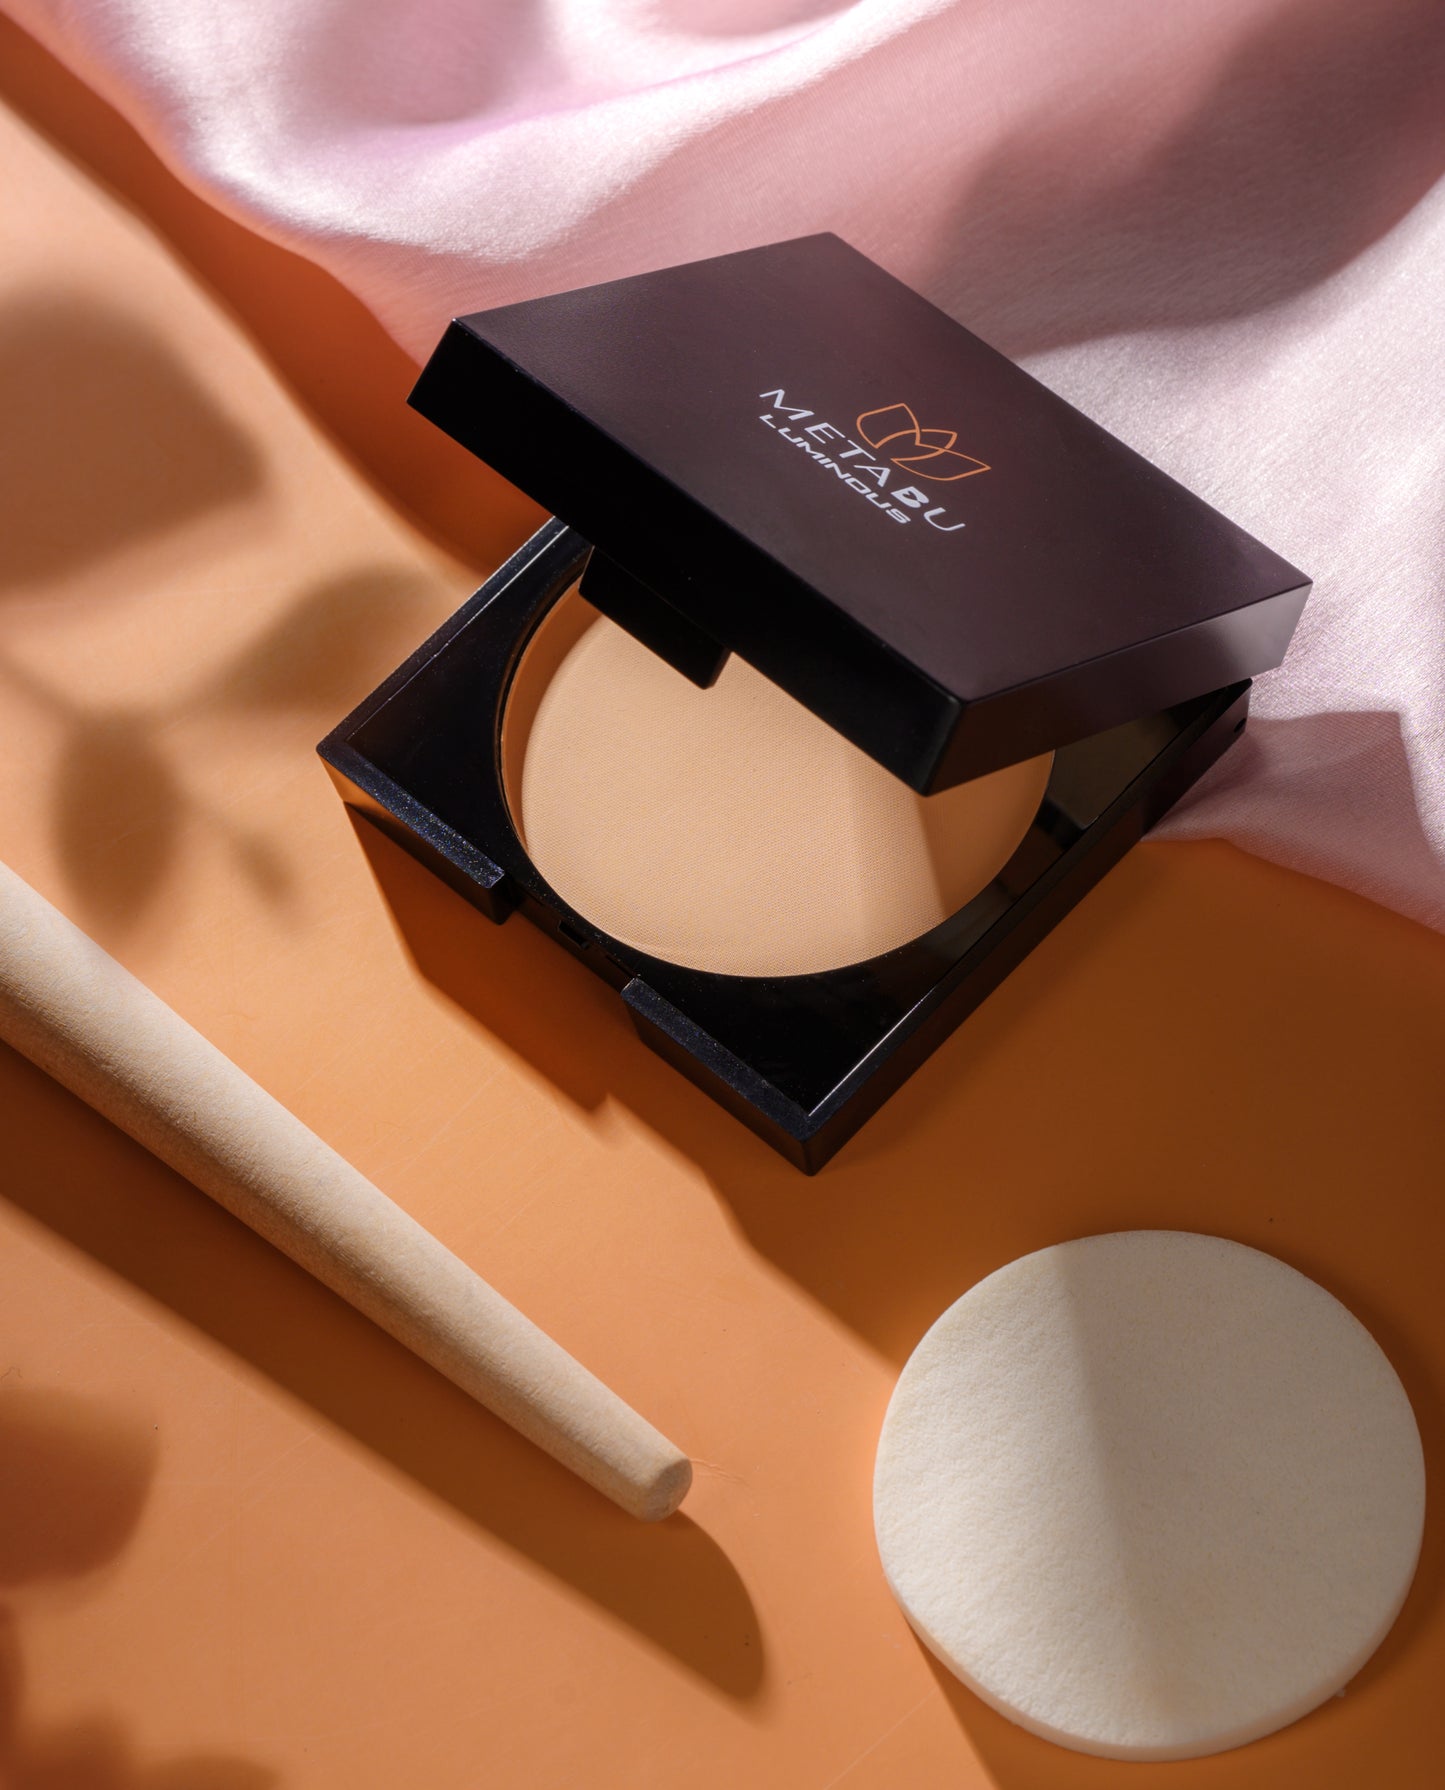 METABU Luminous Compact Powder, Absorbs Oil, Long lasting, Enriched with SPF 25, Matte Finish, 8g